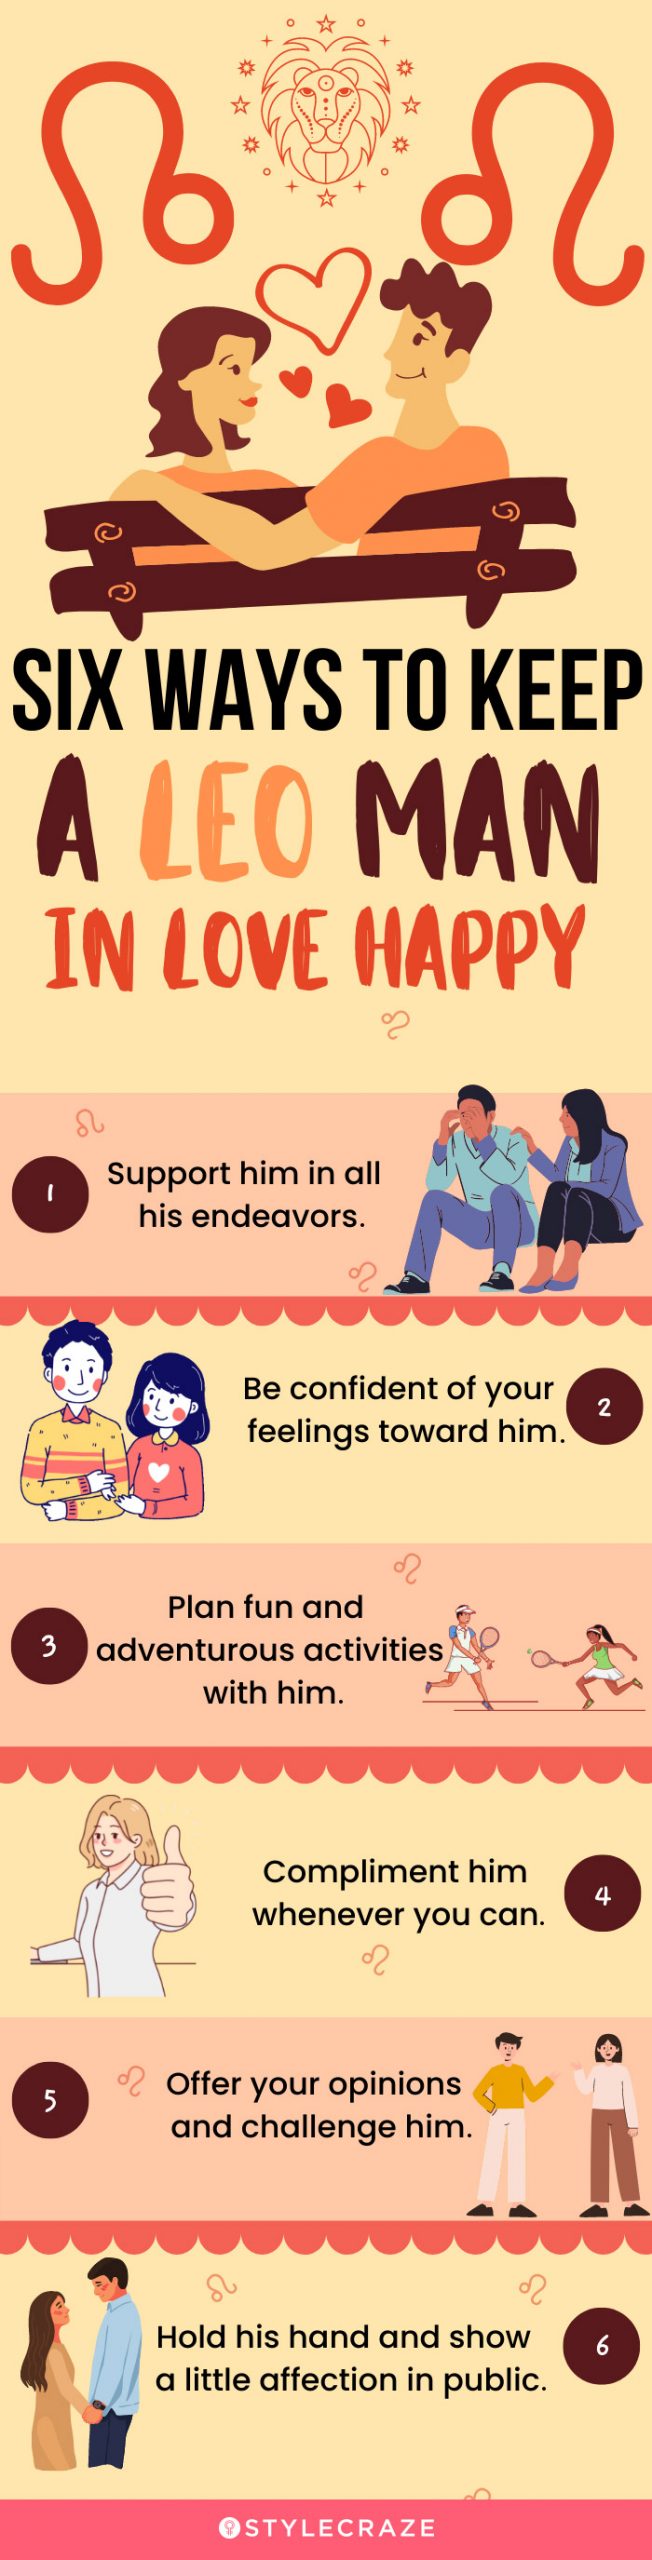 six ways to keep a leo man in love happy [infographic]